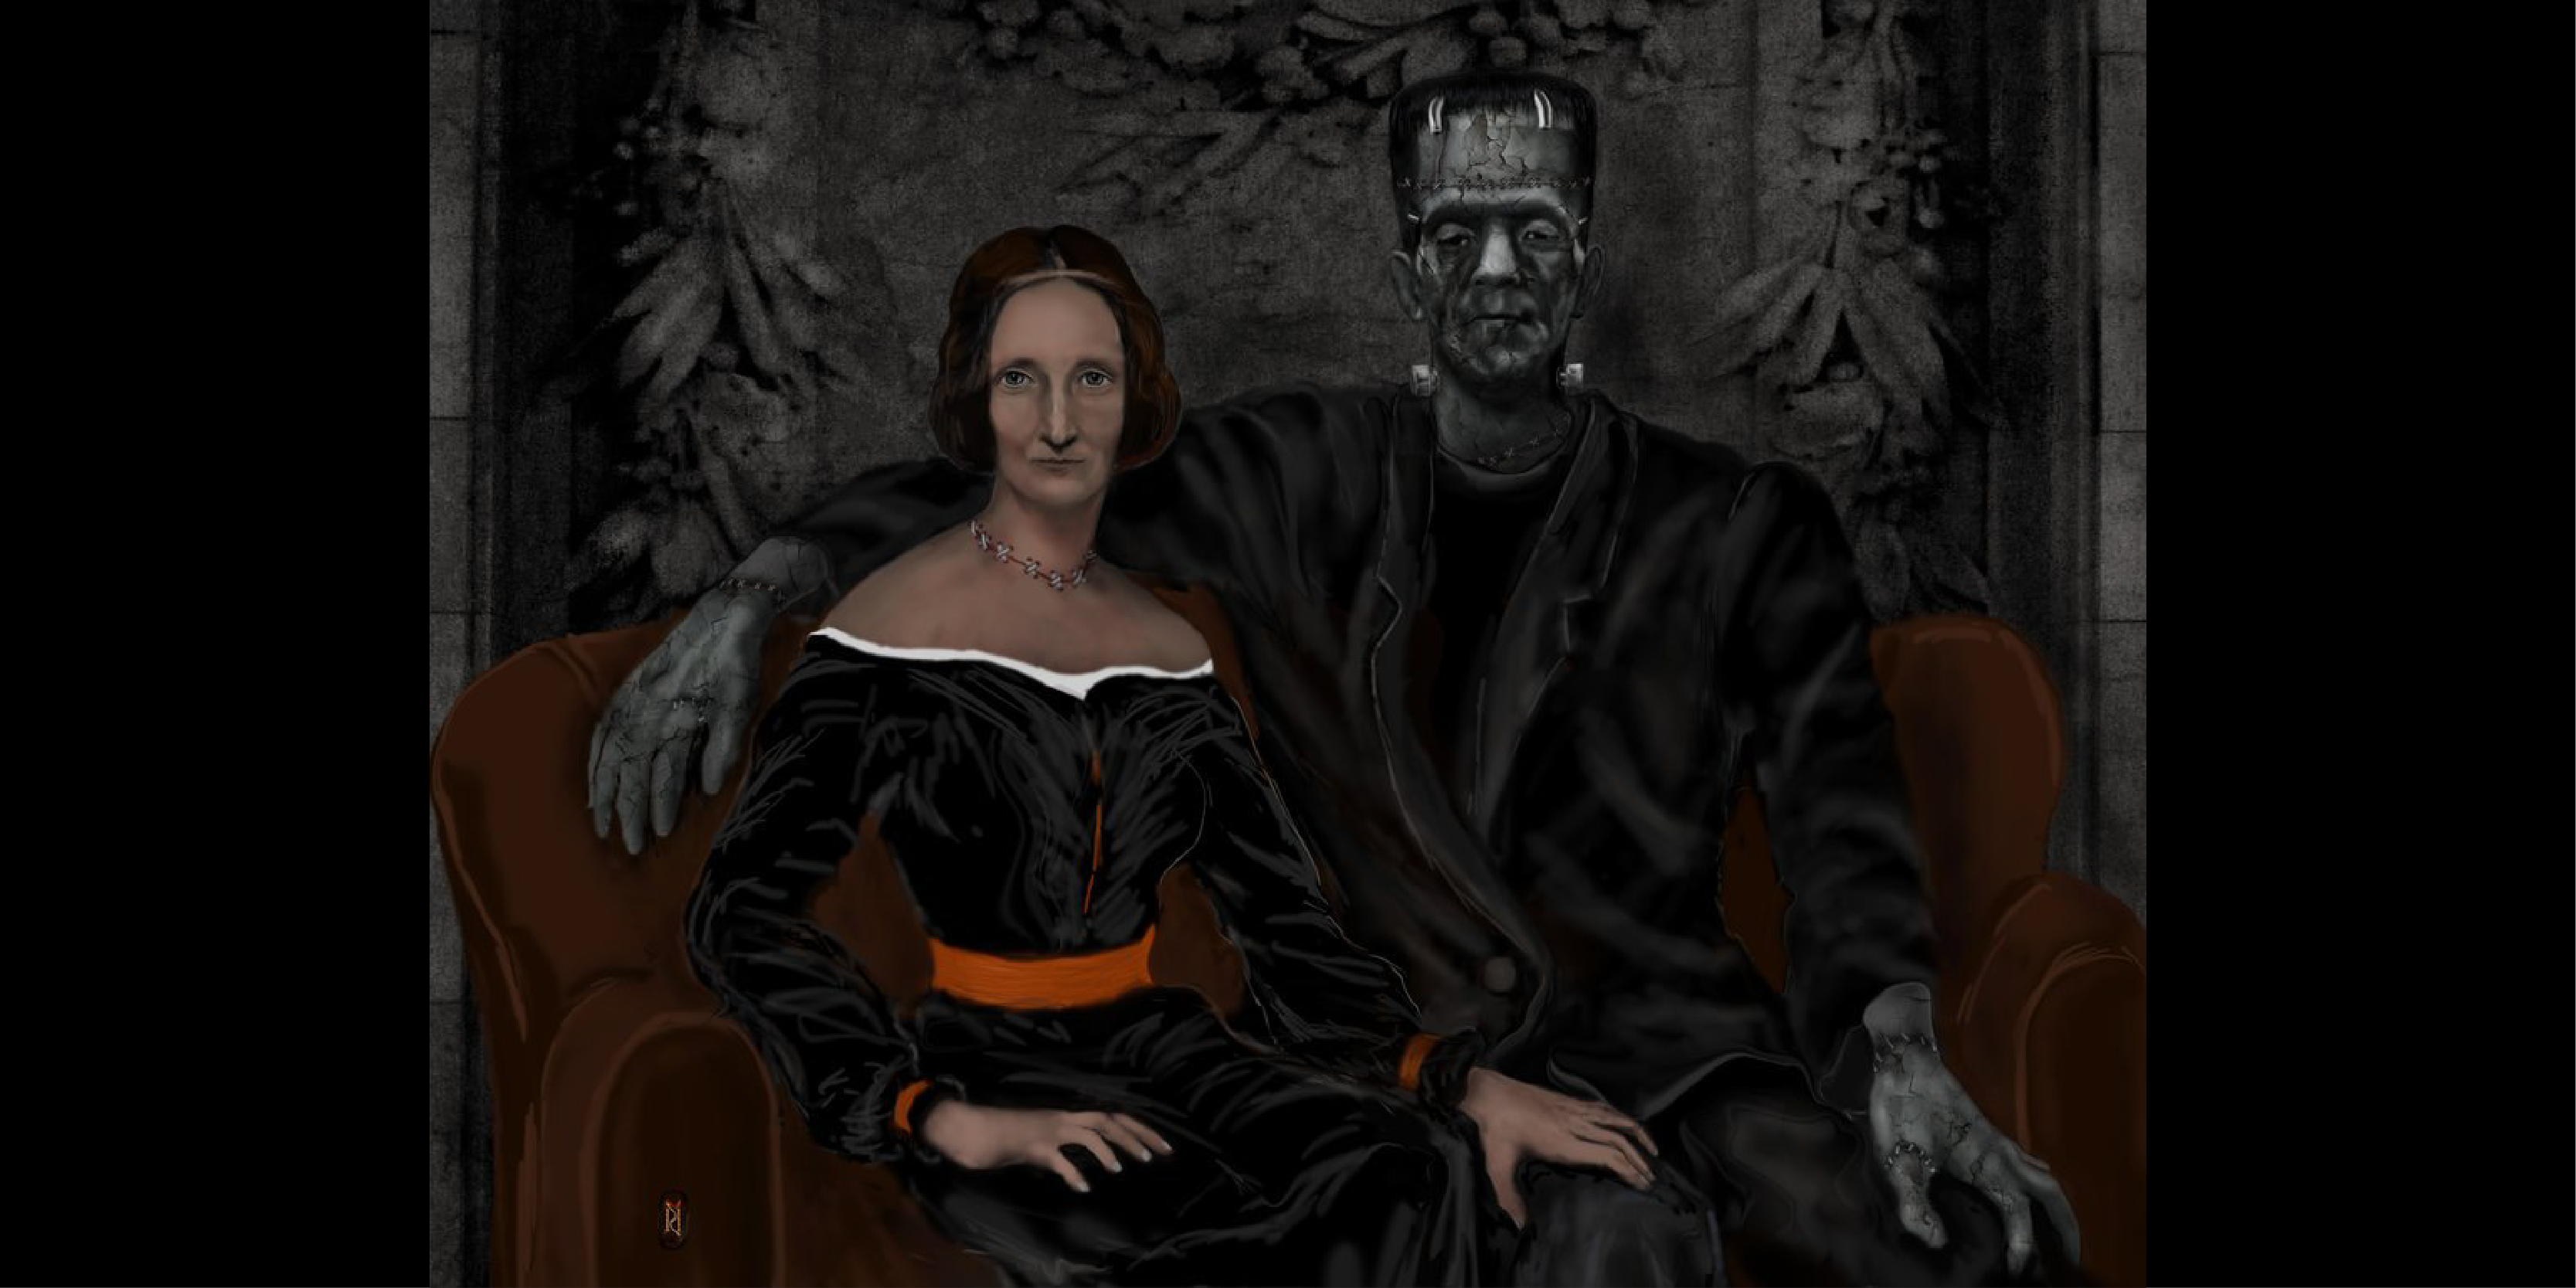 art of Mary Shelley and Frankenstein's Monster sitting together like a couple